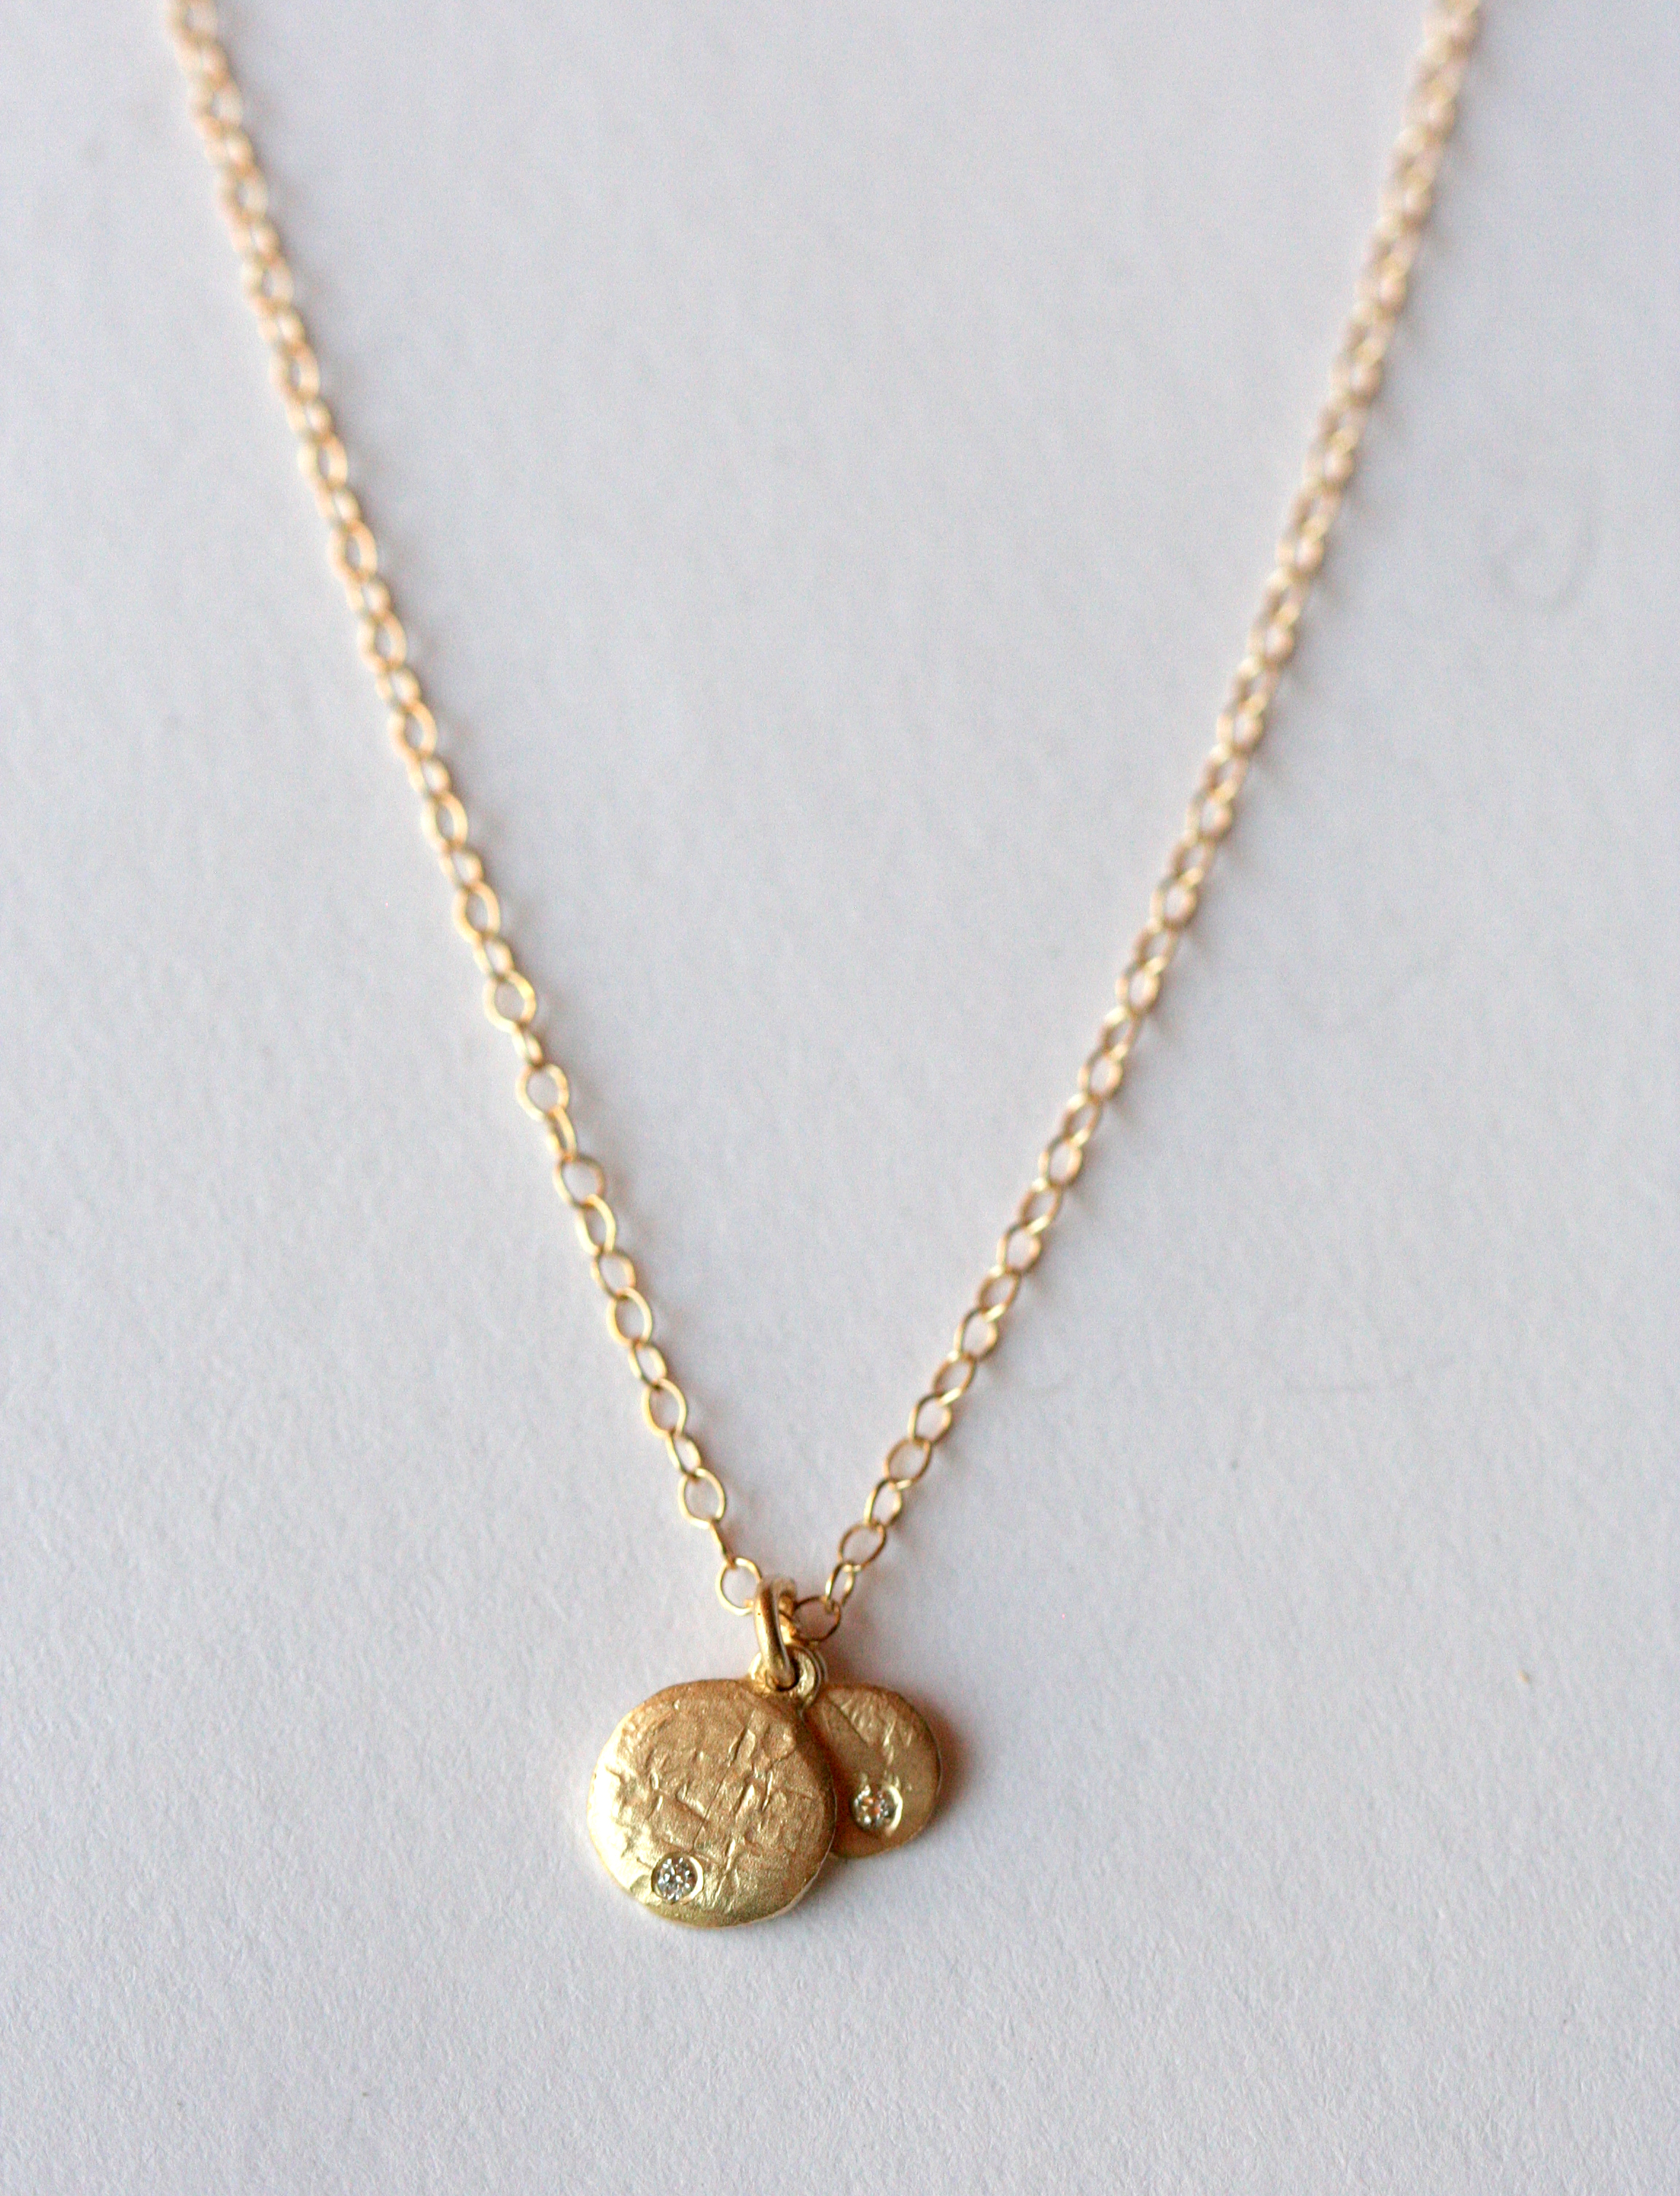 14K Gold 2-Disc Necklace, with Diamonds | los angeles art and jewelry